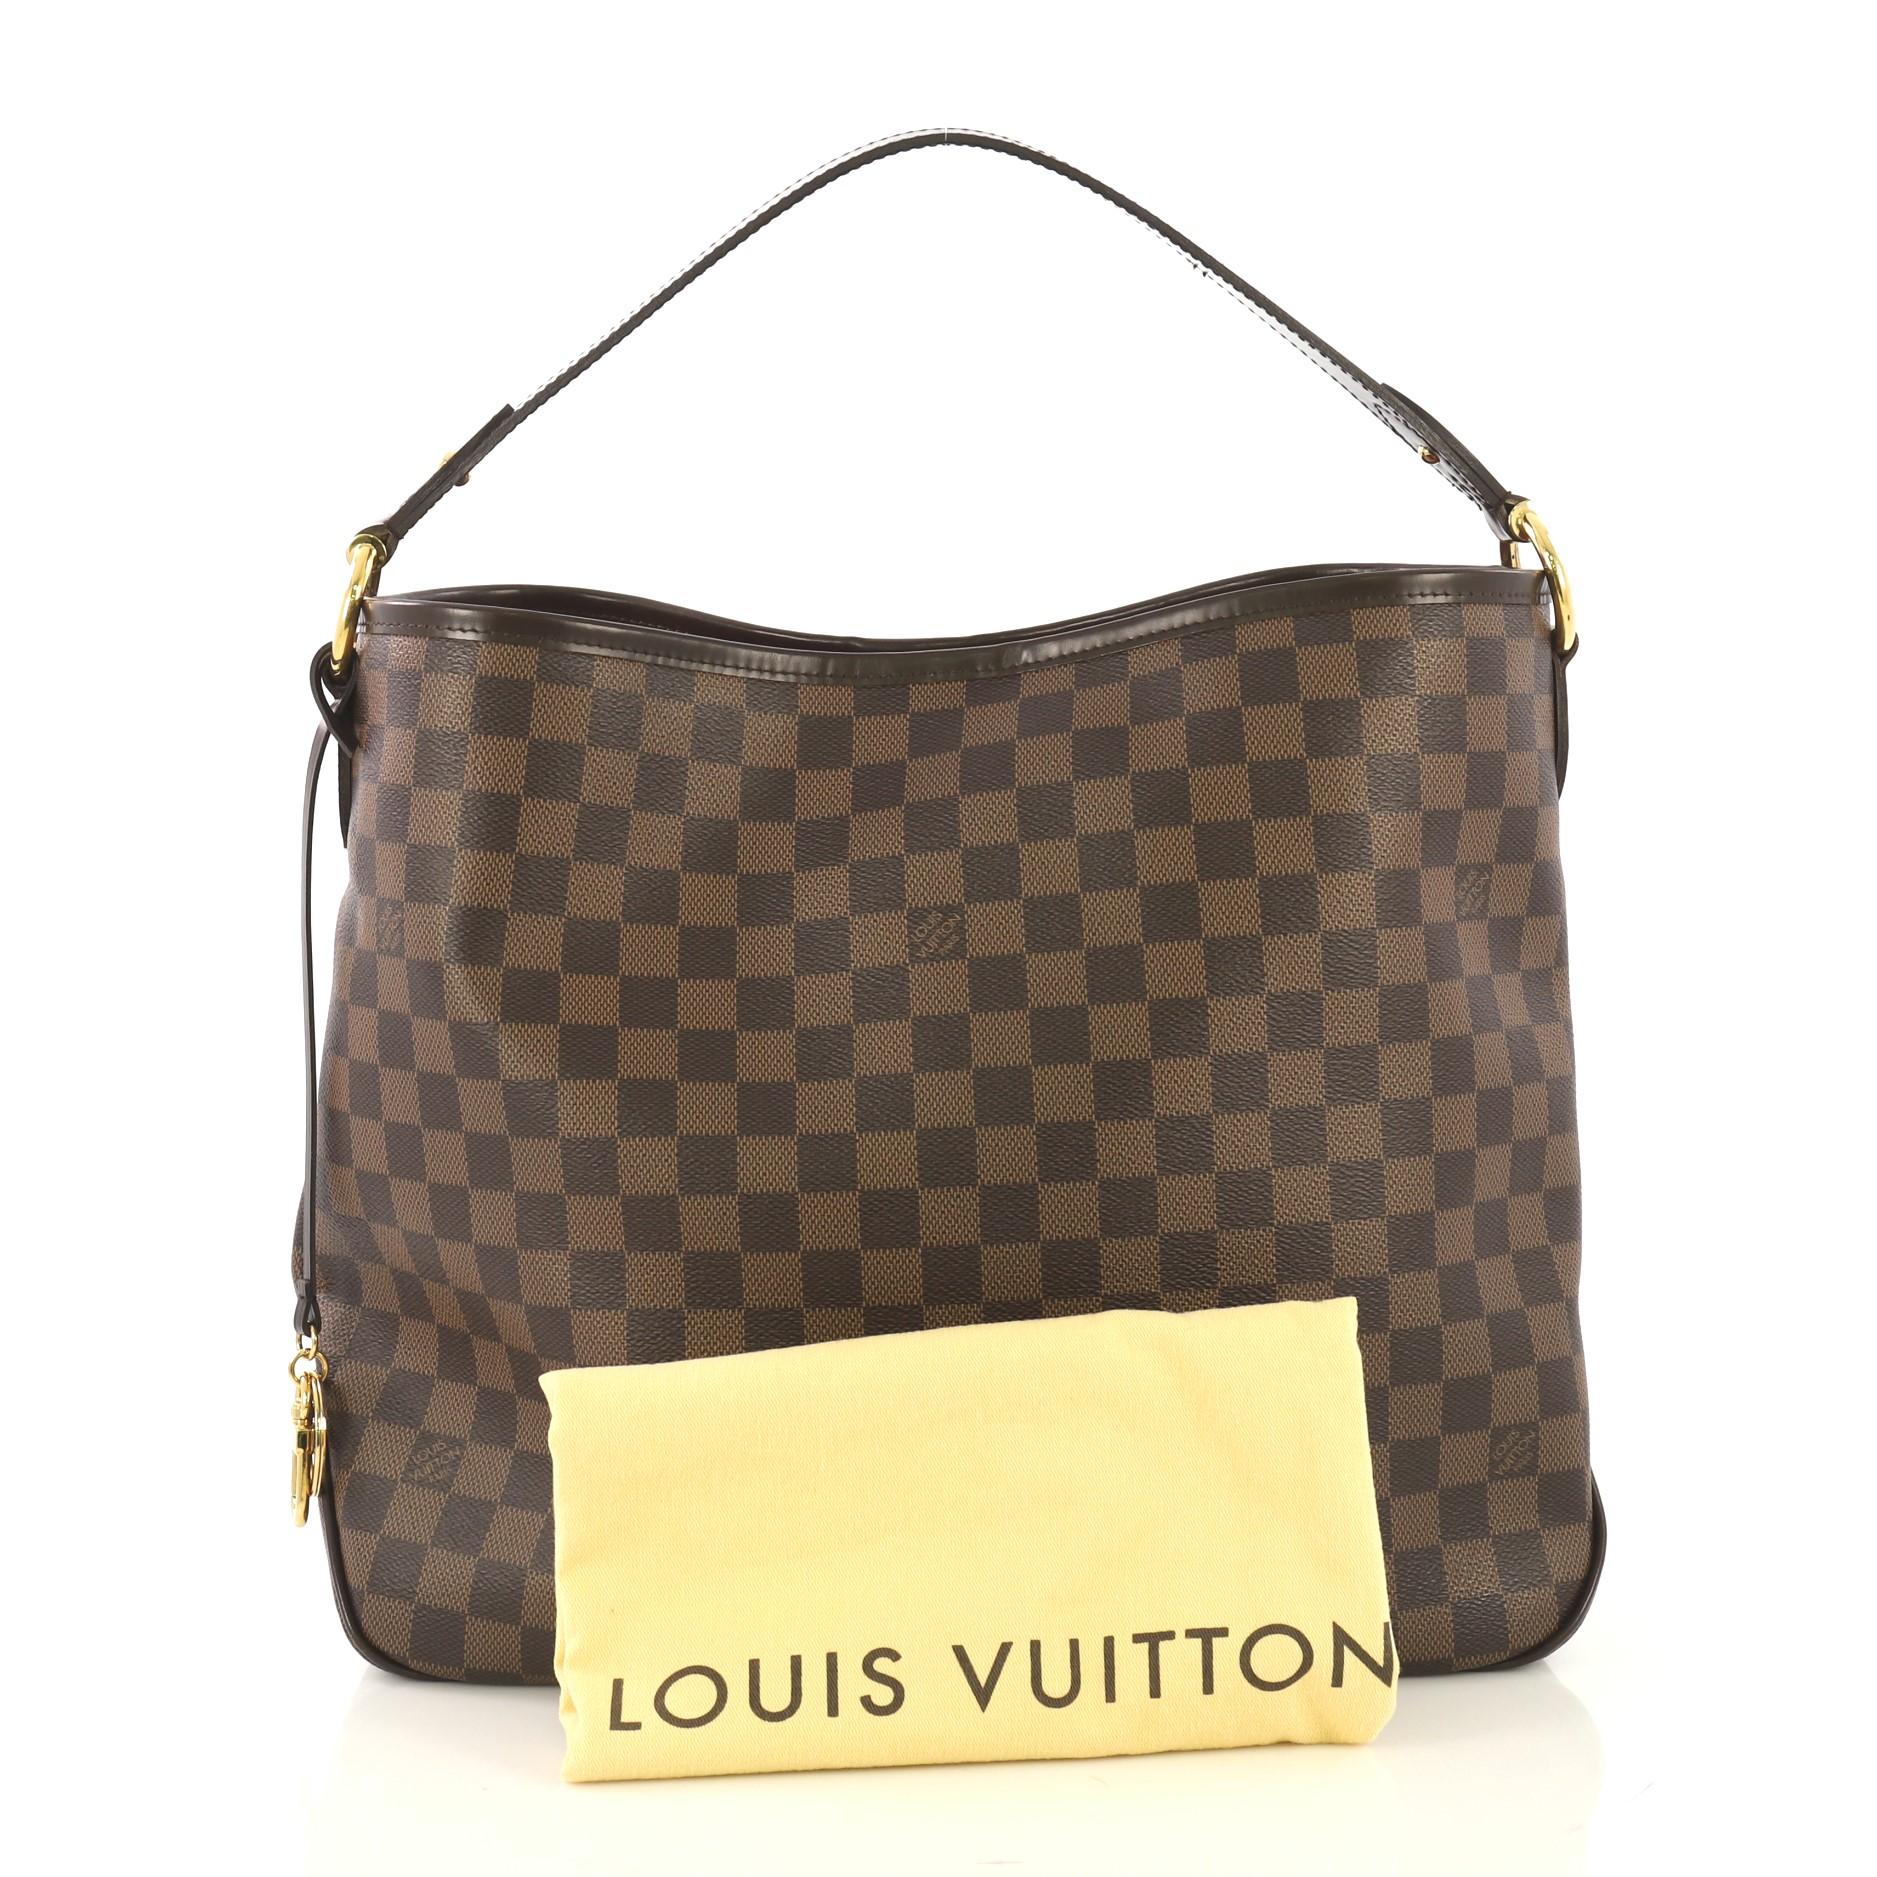 This Louis Vuitton Delightful NM Handbag Damier MM, crafted in damier ebene coated canvas, features a flat leather handle and gold-tone hardware. Its hook closure opens to a red fabric interior with side zip pocket. Authenticity code reads: SD1135.